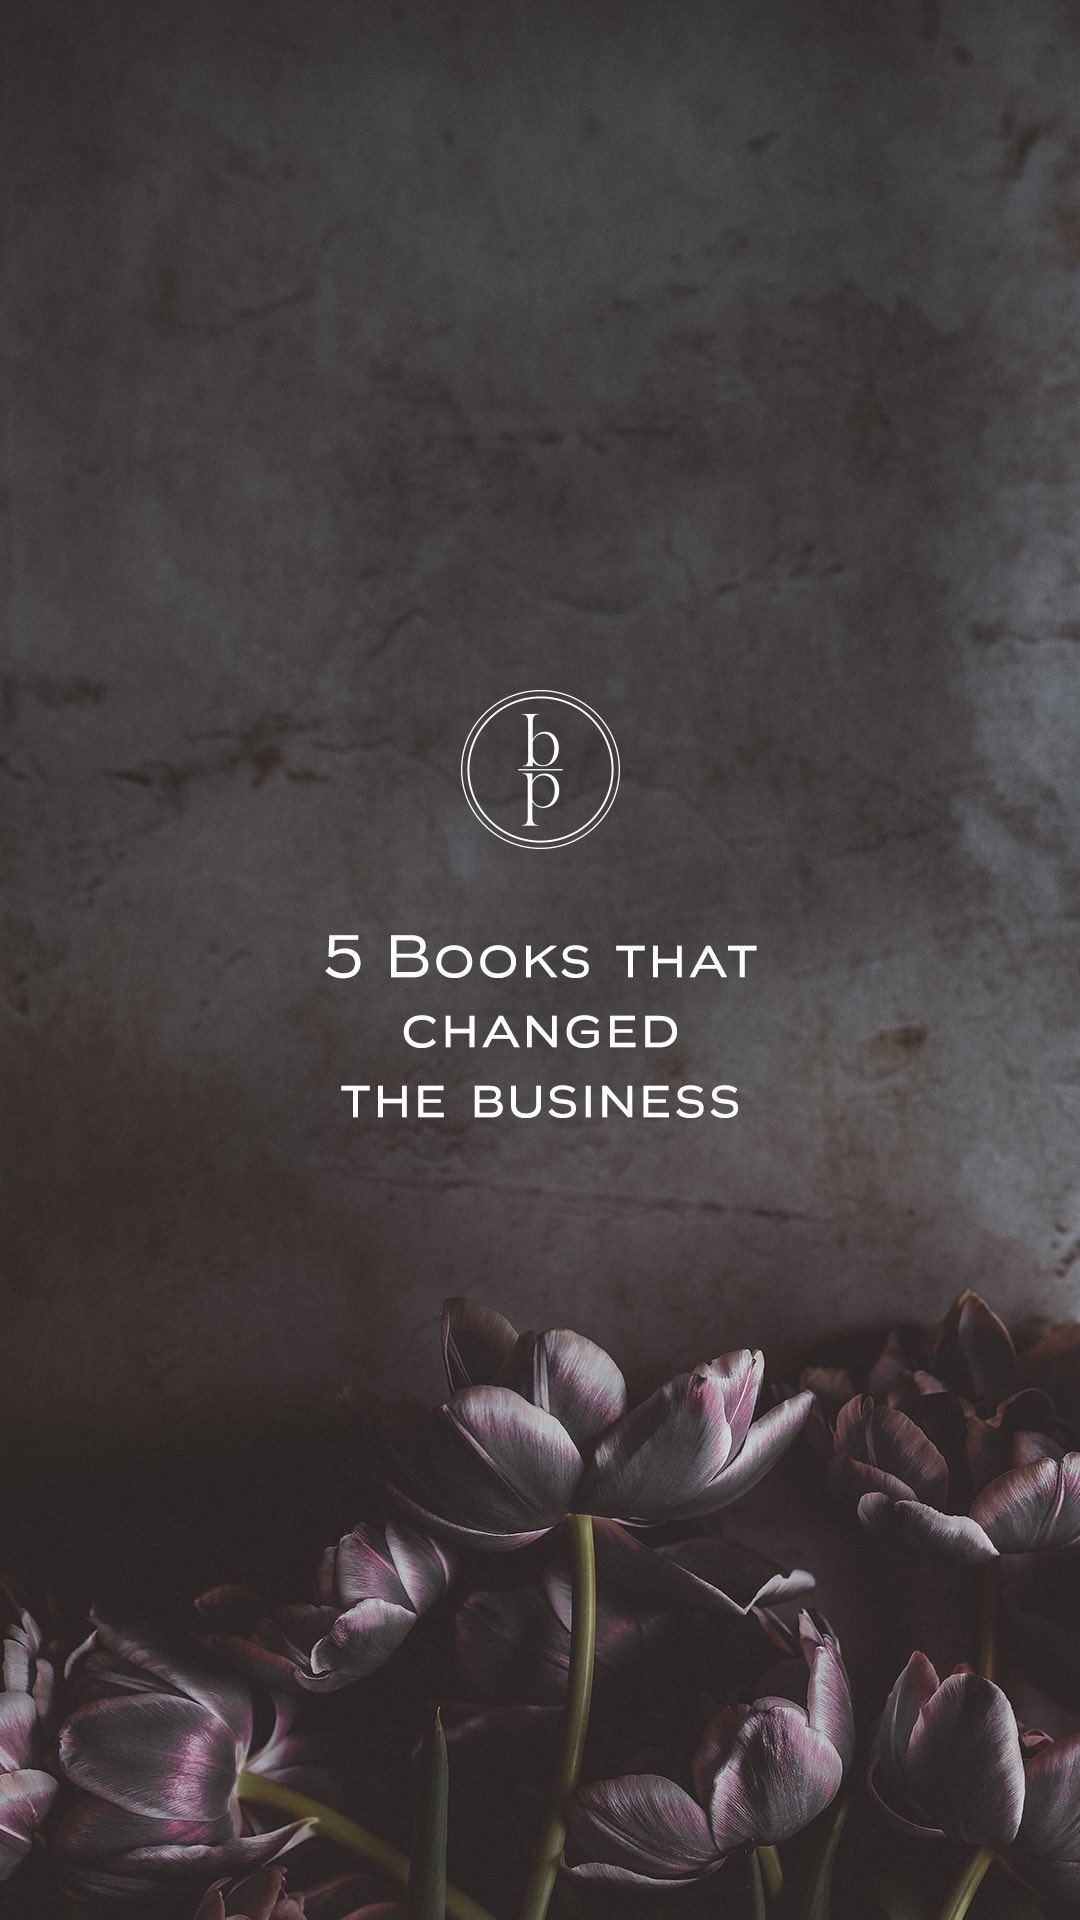 5 Books that changed EVERYTHING.

When I dabbled with the idea of “leaving” luxury bespoke stationery and fully commit to brand strategy and design, I was on quest for clarity to put my whole self in.

I knew through speaking and leading businesses, entrepreneurs and organizations - my heart was beating so fast for more!

So, there I went on a journe and found pivotal moments between the lines that confirmed it was time.

I experienced life changes, ground breaking ideas and the clarity I was longing for in these books.

01. The Big Leap, @hendricks.gay
02. The Subtle Art of Not Giving a F*ck, @markmanson
03. Zag, @marty_neumeier
04. Building a Story Brand, @donaldmiller
05. Untamed, @glennondoyle

These people were my champions, my little voice, my inspiration. I’m was and still am incredibly grateful for their advice!

I’d like to know, what pieces or books have given you the most clarity? 👇🏻👇🏽👇🏾

#brandstrategy #brandclarity #branding #branddesign #branding #brandstrategist #marketingconsultant #brandconsultant #branddesigner #brandstory #storybrand #zag #thebigleap #untamed #brandingkc #creativekc #weekendreading #businessbooks #businesstips #brandingtips #businessadvice